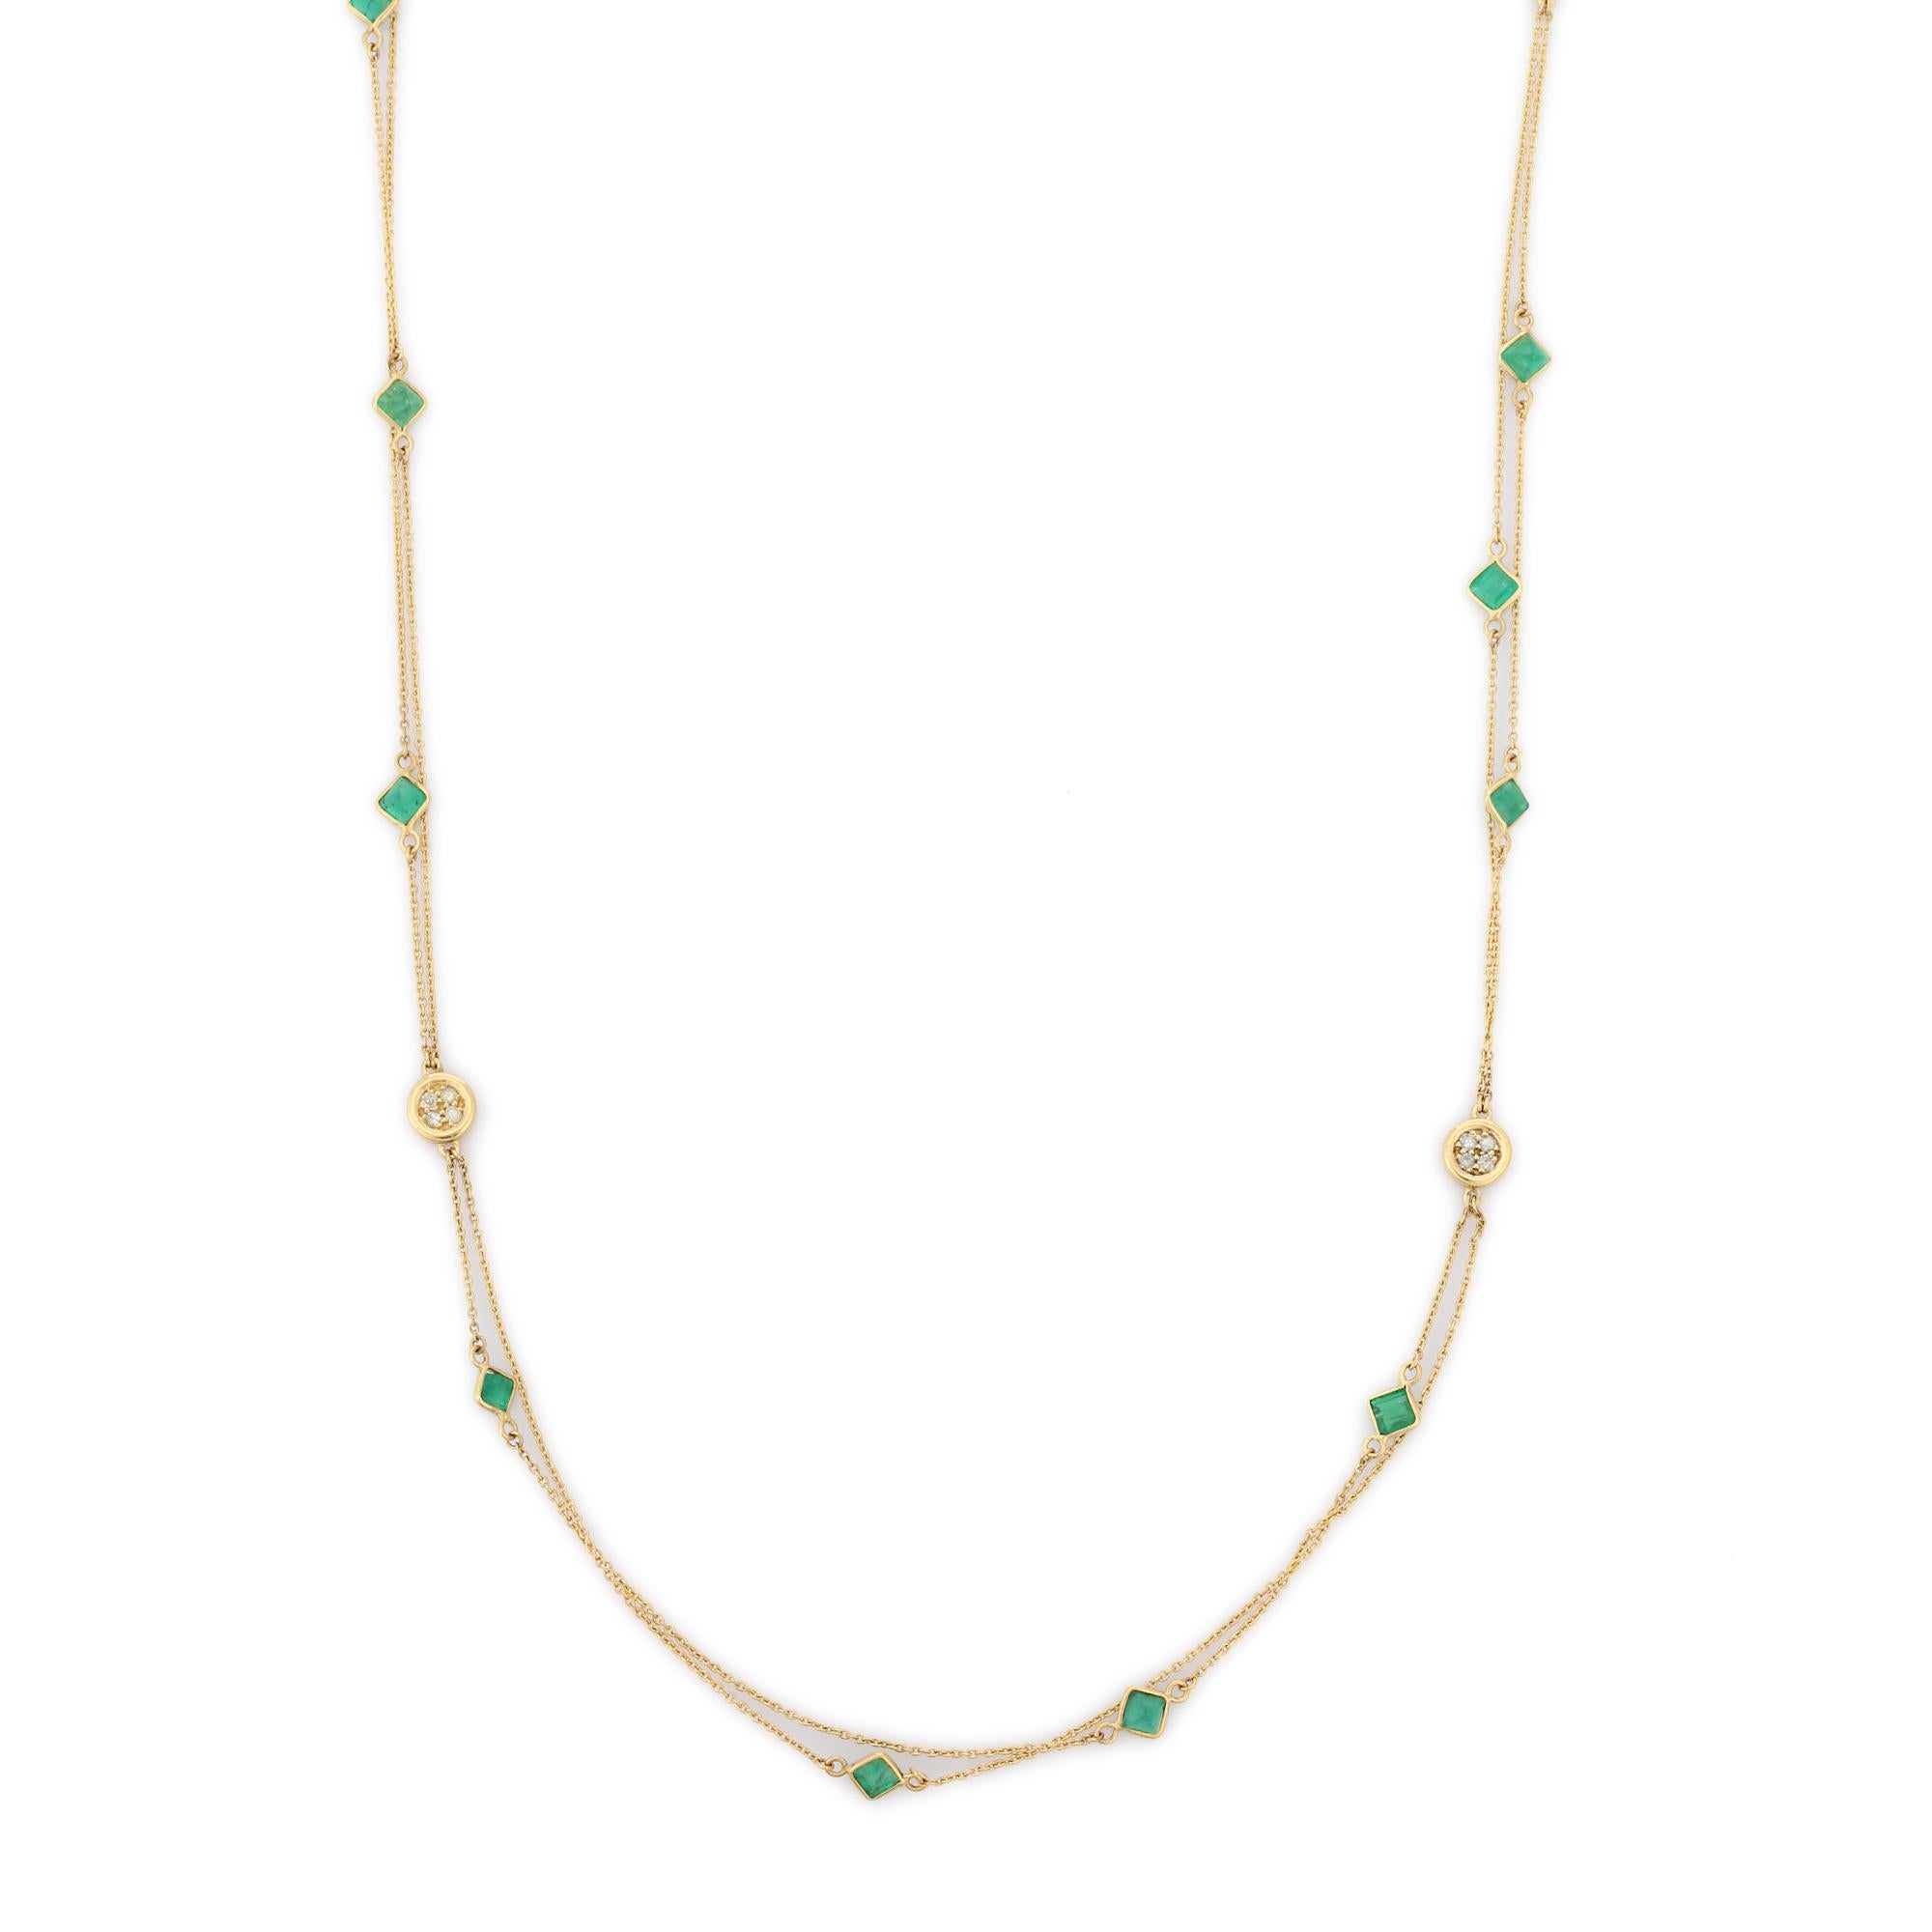 Modern 3.75 Carat Emerald Diamond Multi Strained Chain Necklace in 18K Yellow Gold For Sale